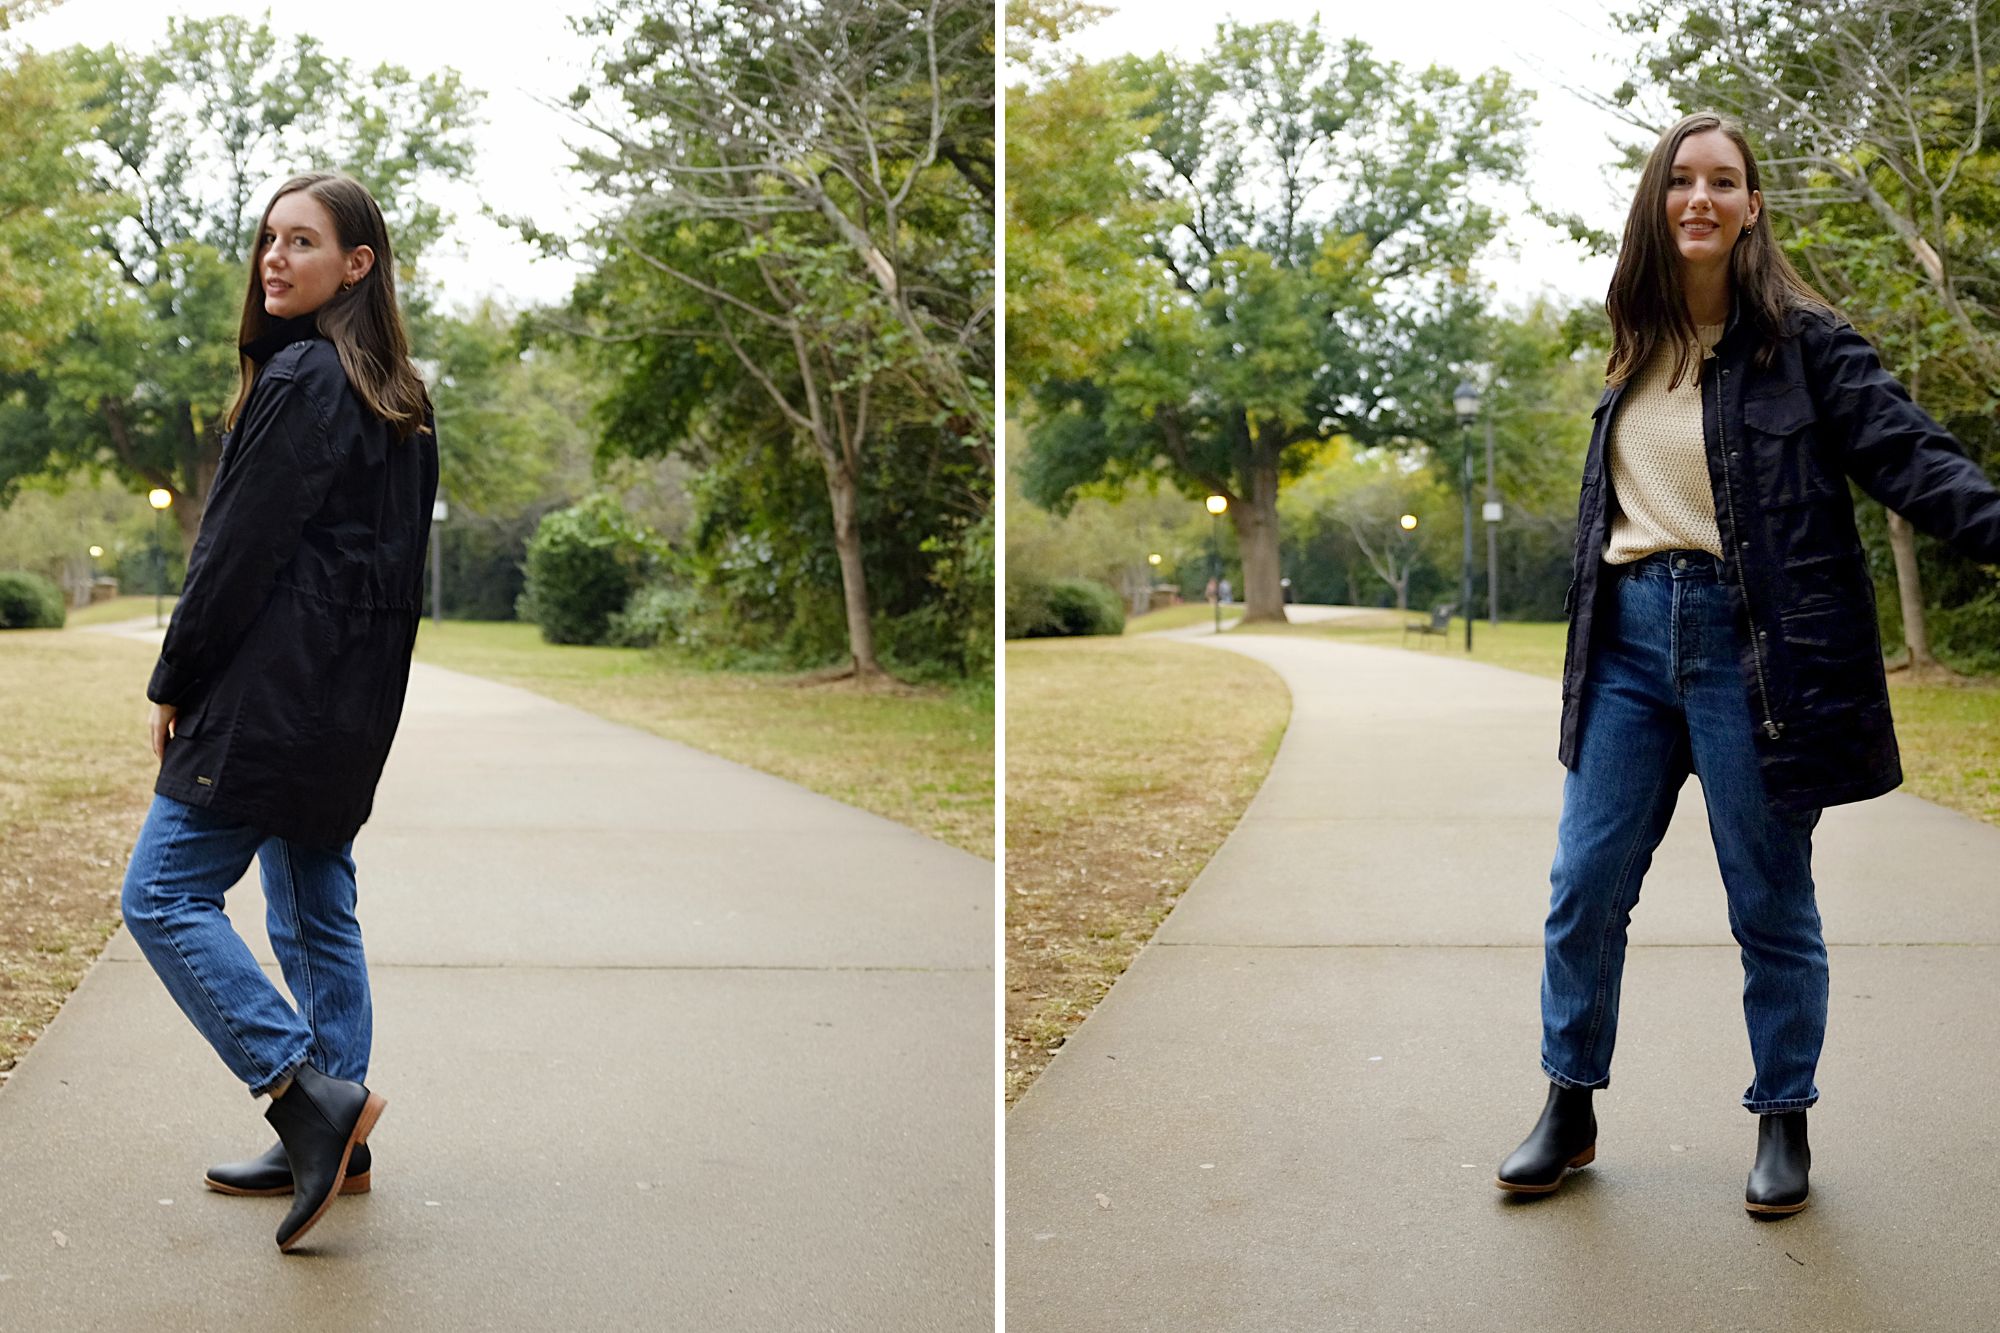 Alyssa wears the Pact Lined Woven Safari Jacket with a sweater and jeans in two images